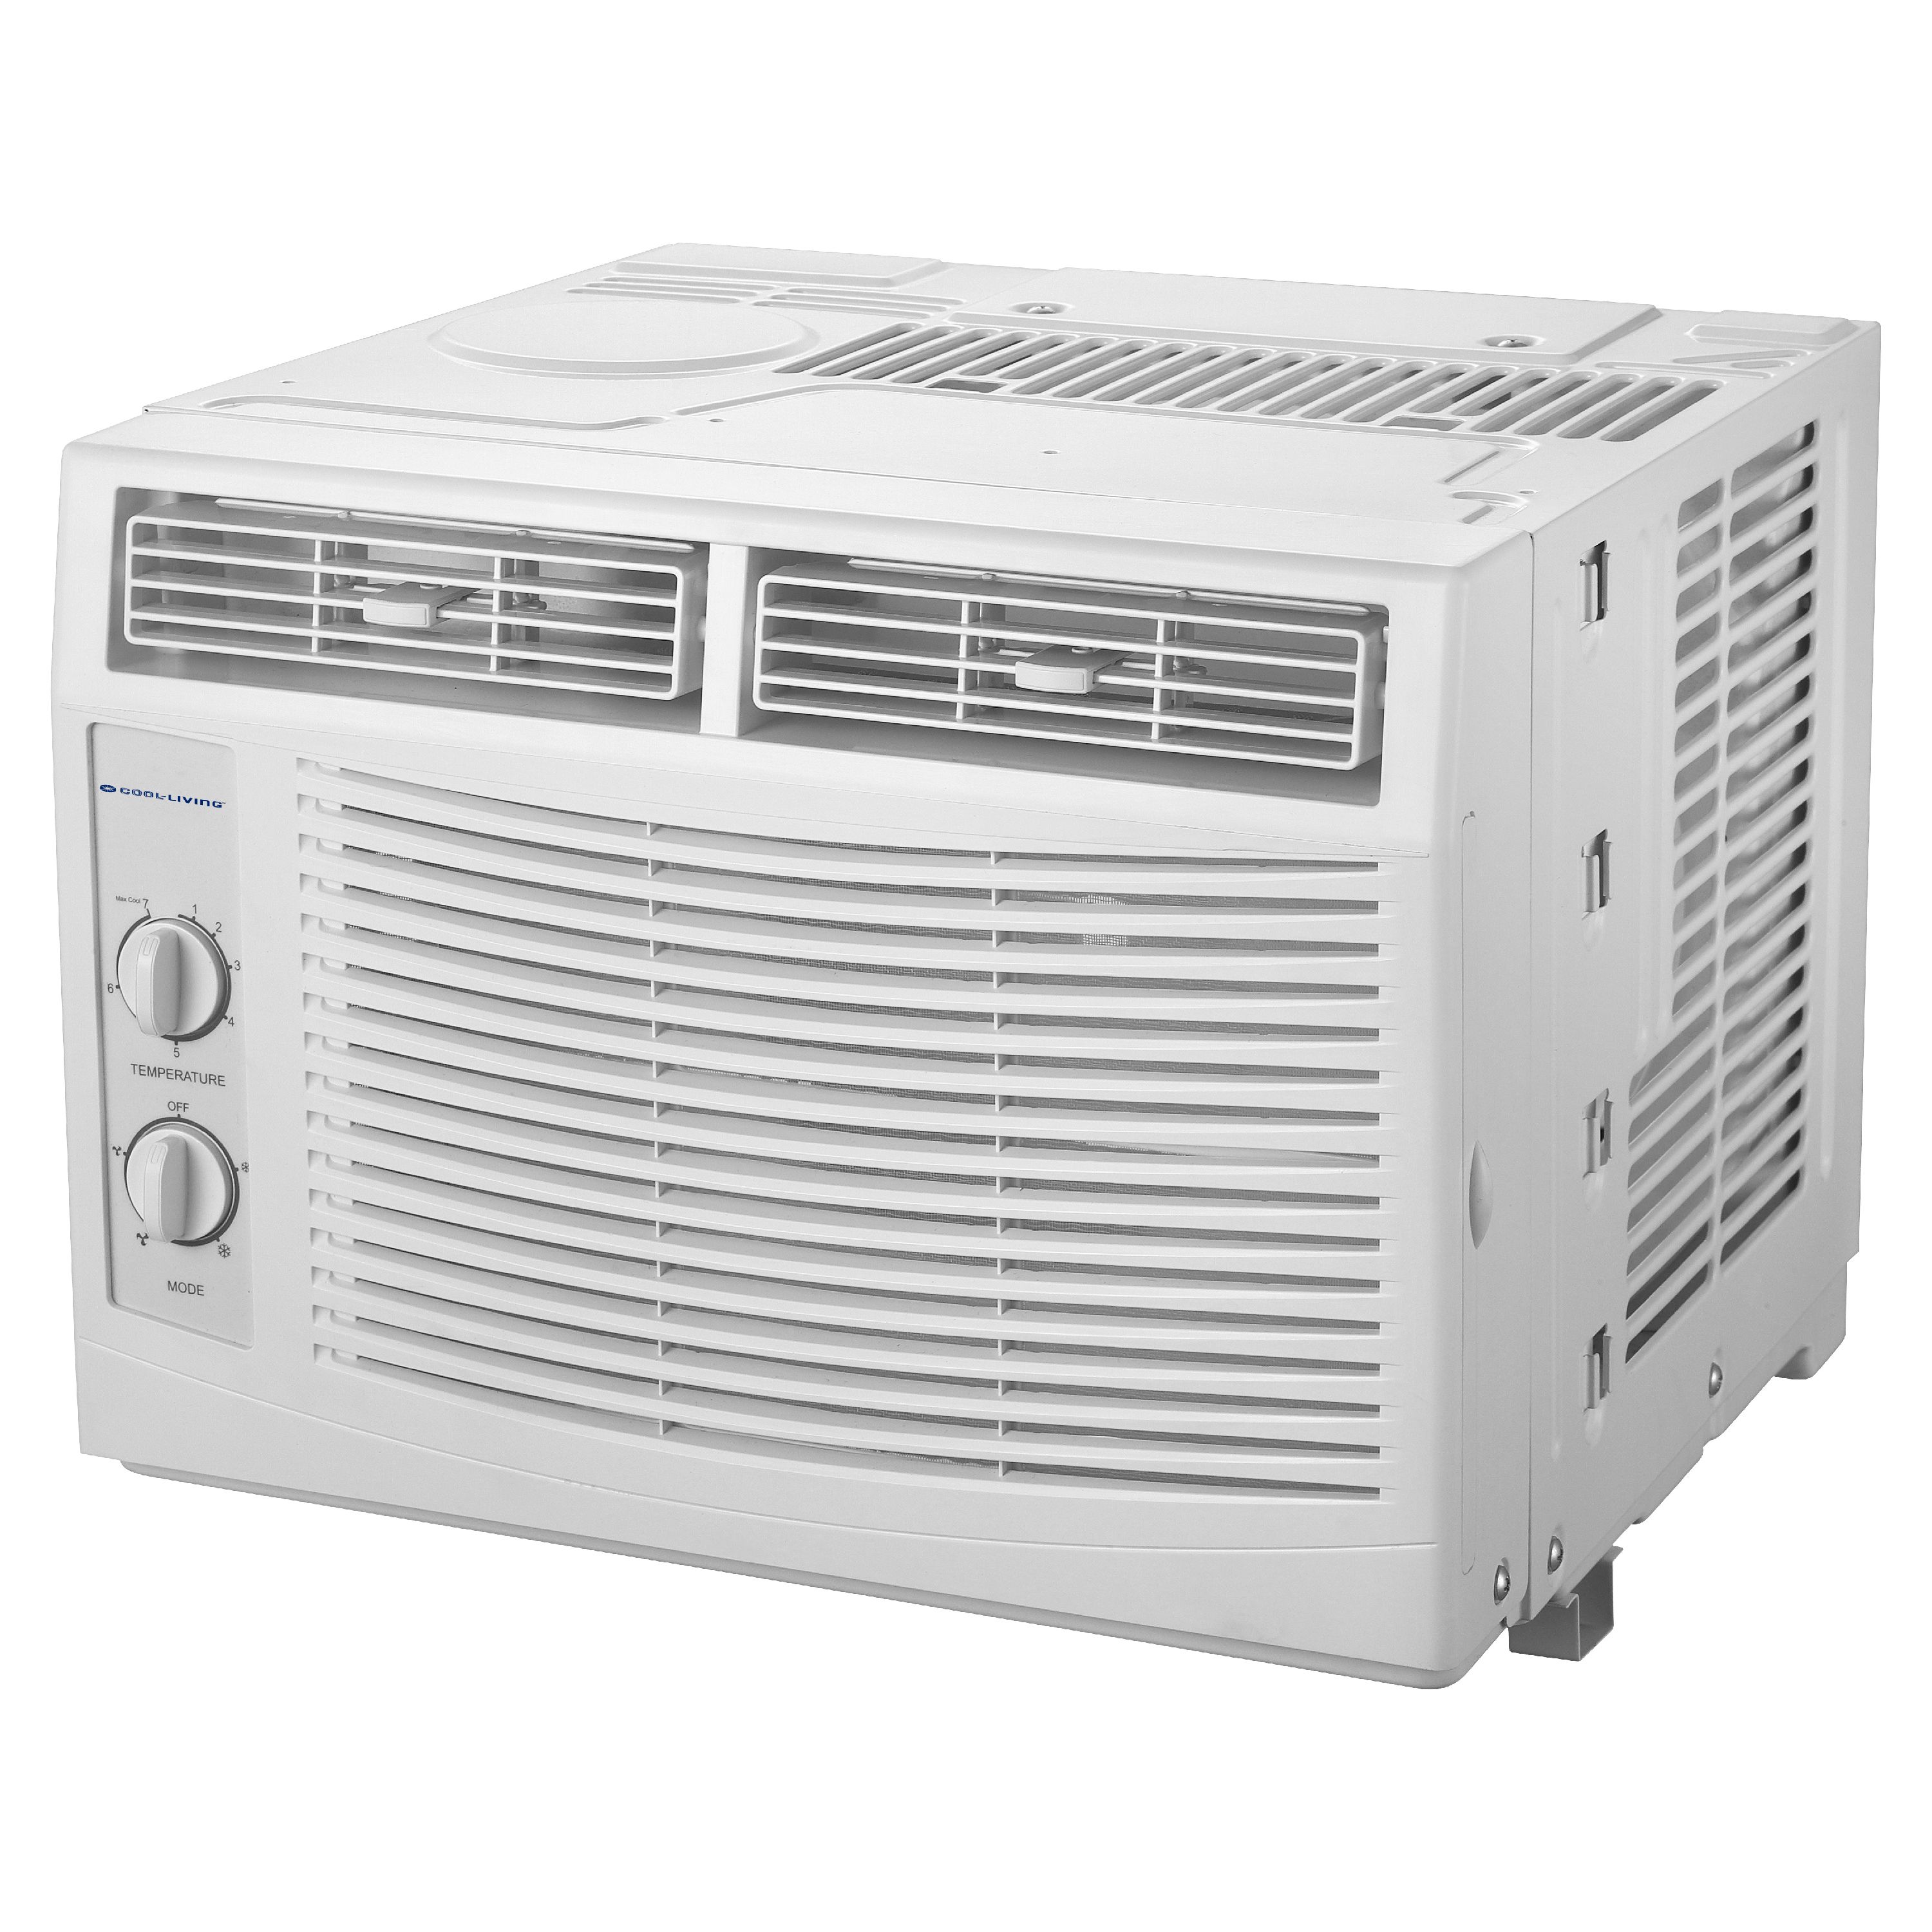 Cool-Living 5,000 BTU Window Air Conditioner with Installation Kit - image 4 of 5